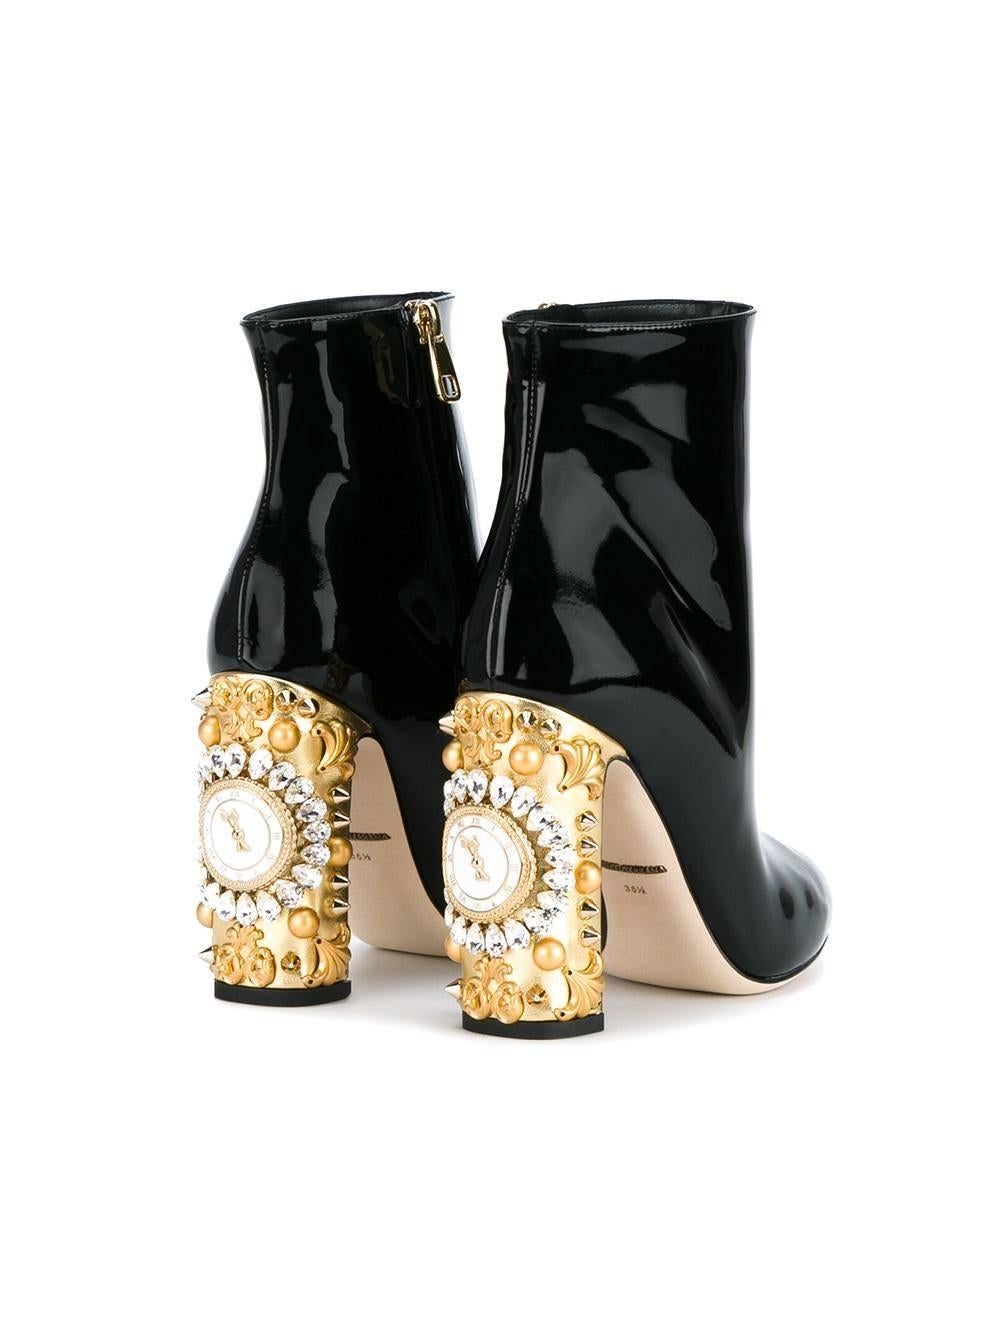 CURATOR'S NOTES

Size IT 38.5
Calf and lambskin leather
Metal
Gold tone
Crystal
Side zip closure
Heel height 4